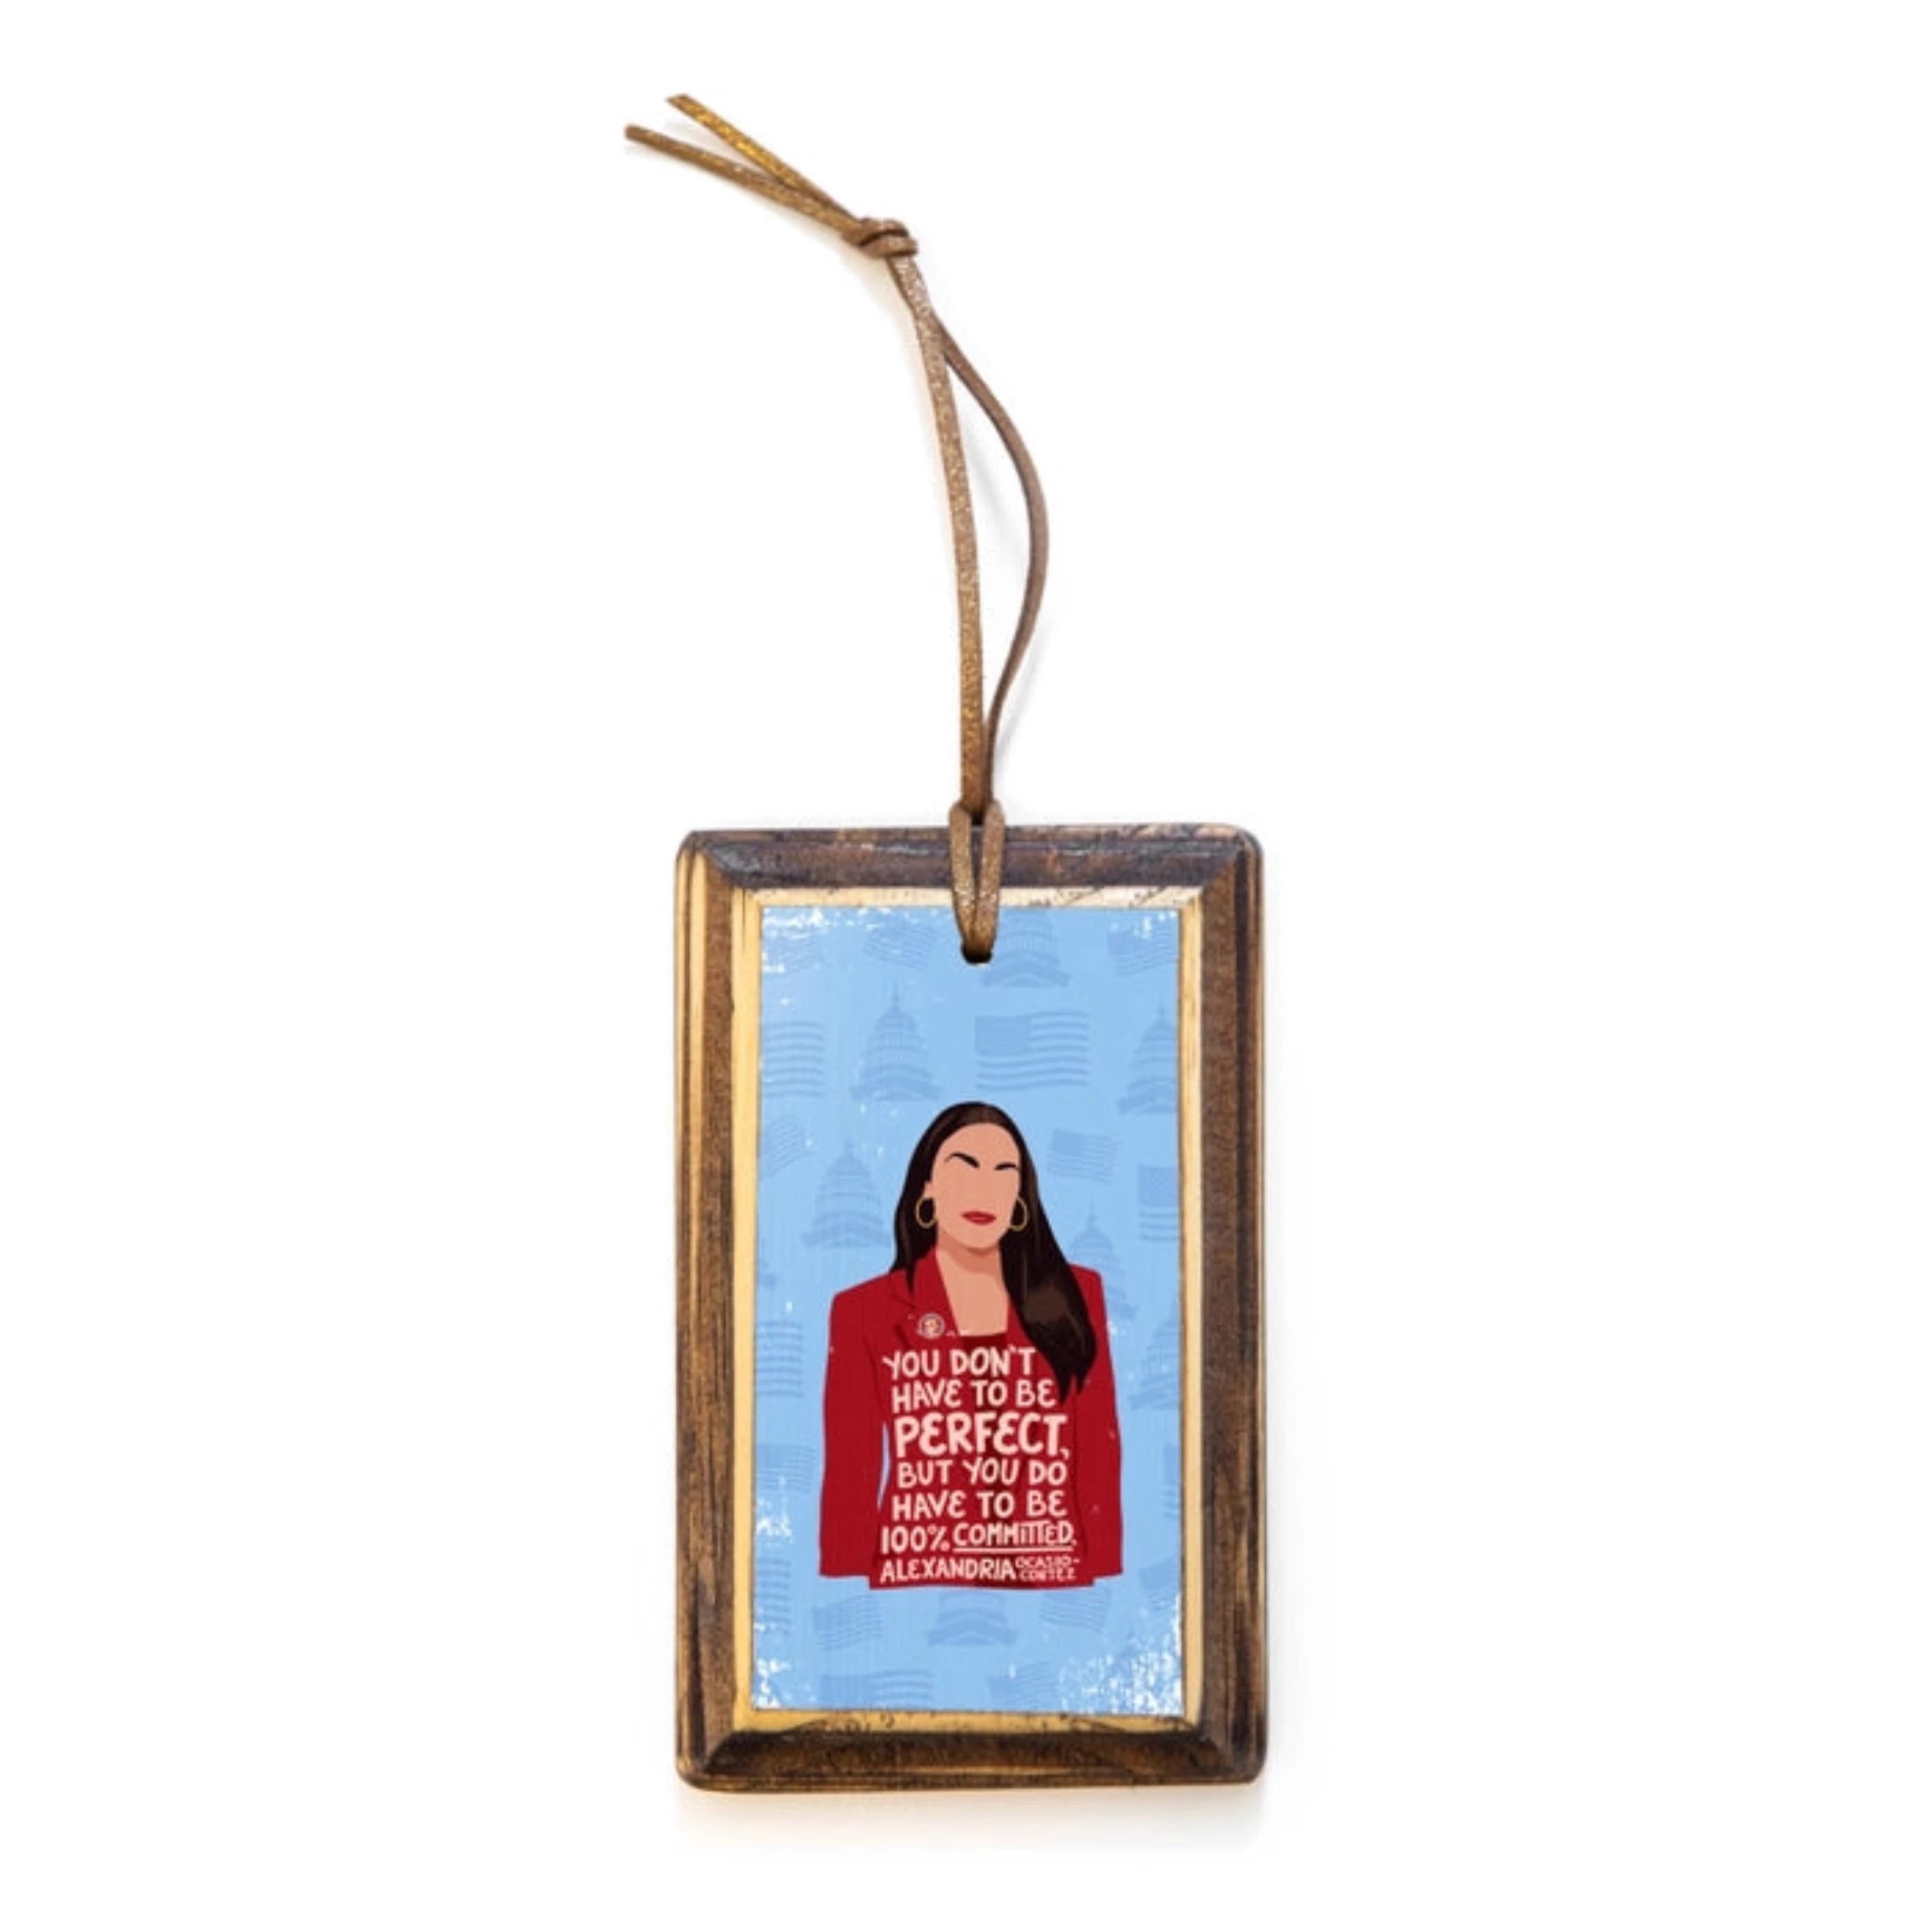 Rectangular wooden ornament with illustrated portrait of Alexandra Ocasio-Cortez and quote 